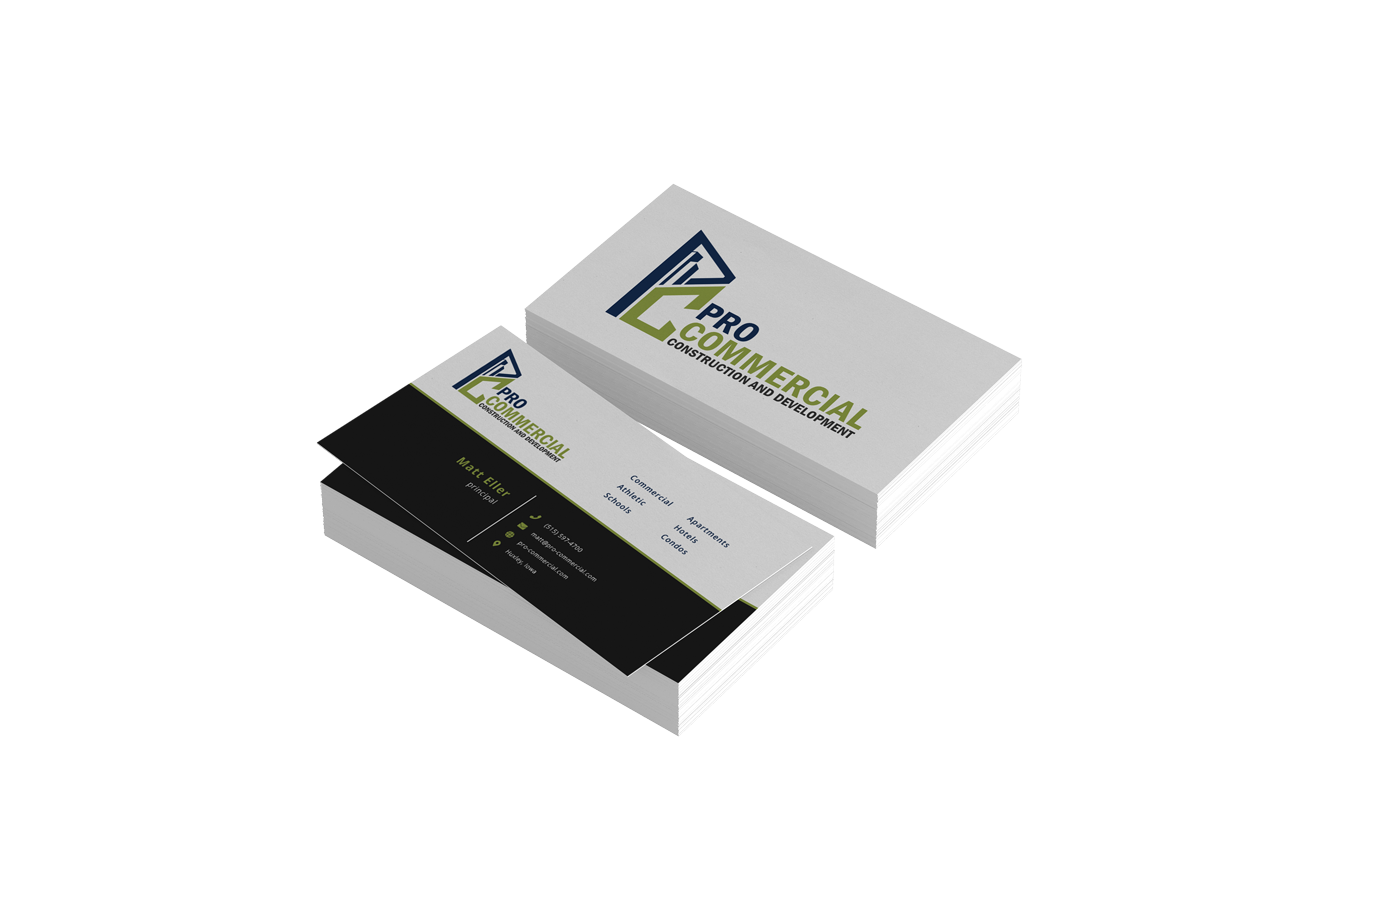 Mockup of business cards for Pro Commercial Construction and Development